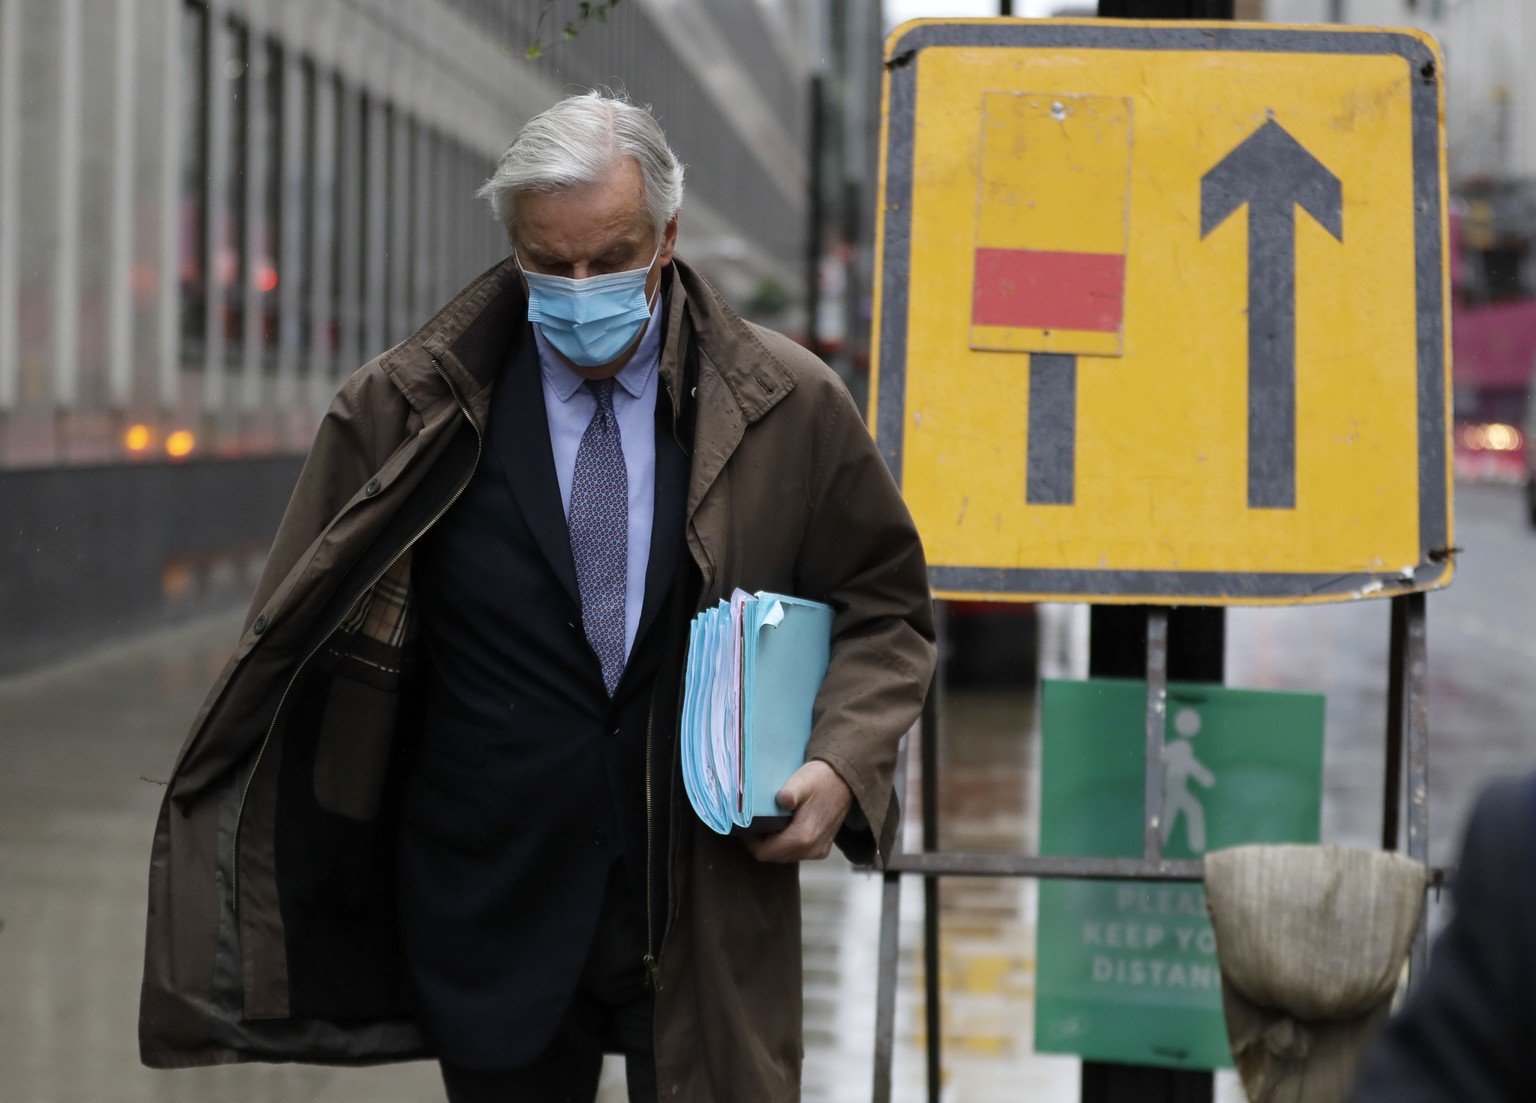 European Union chief Brexit negotiator Michel Barnier walks to the Conference Centre in London, Thursday, Dec. 3, 2020. With less than one month to go before the U.K. exits the EU's economic orbit, ta ...